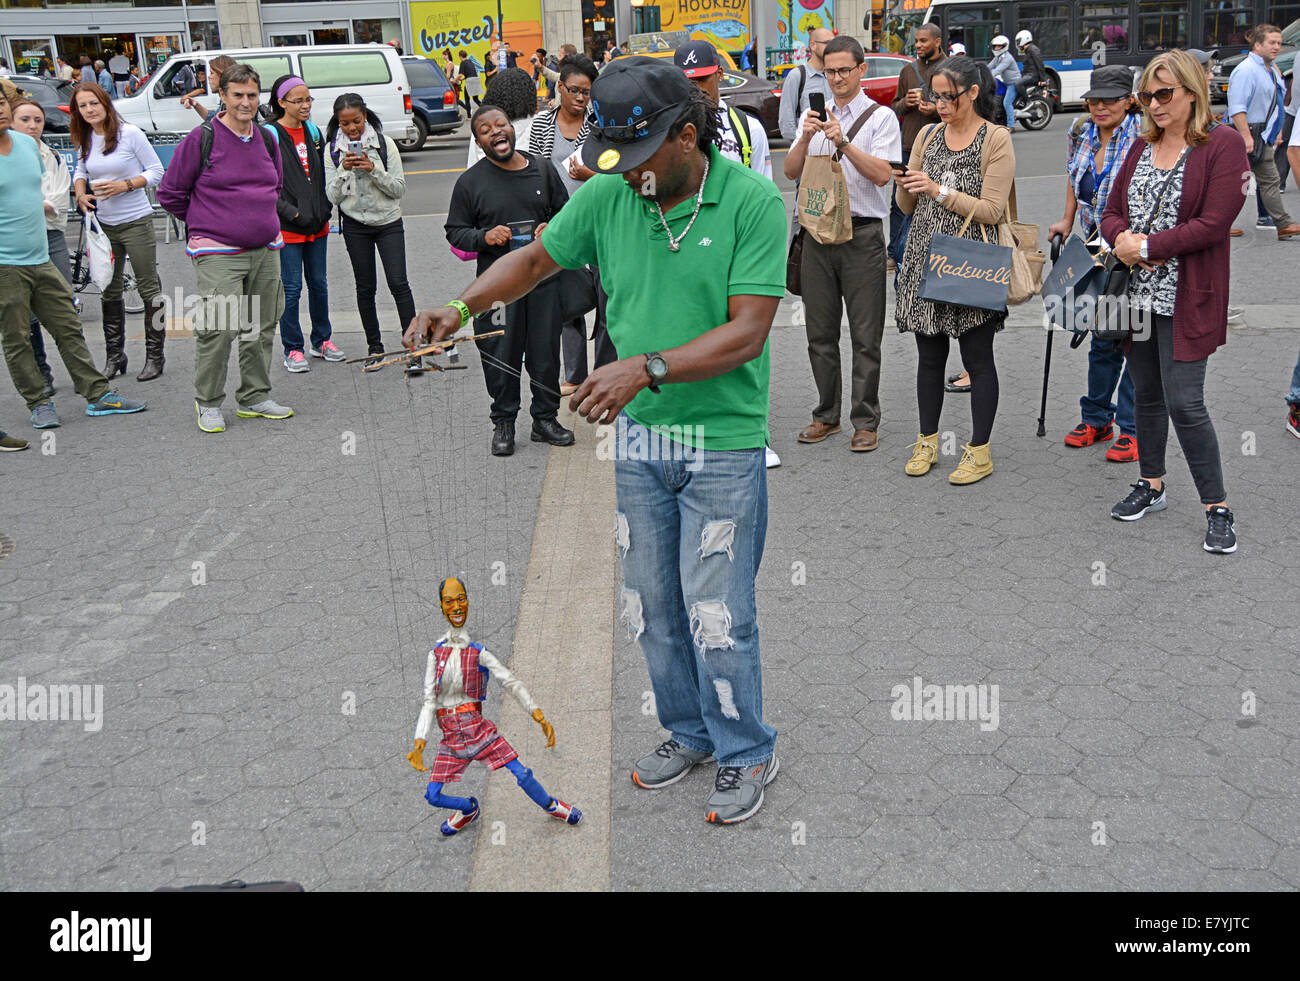 A marionette puppeteer with his dancing puppet in Union Square Park in Manhattan, new York City Stock Photo